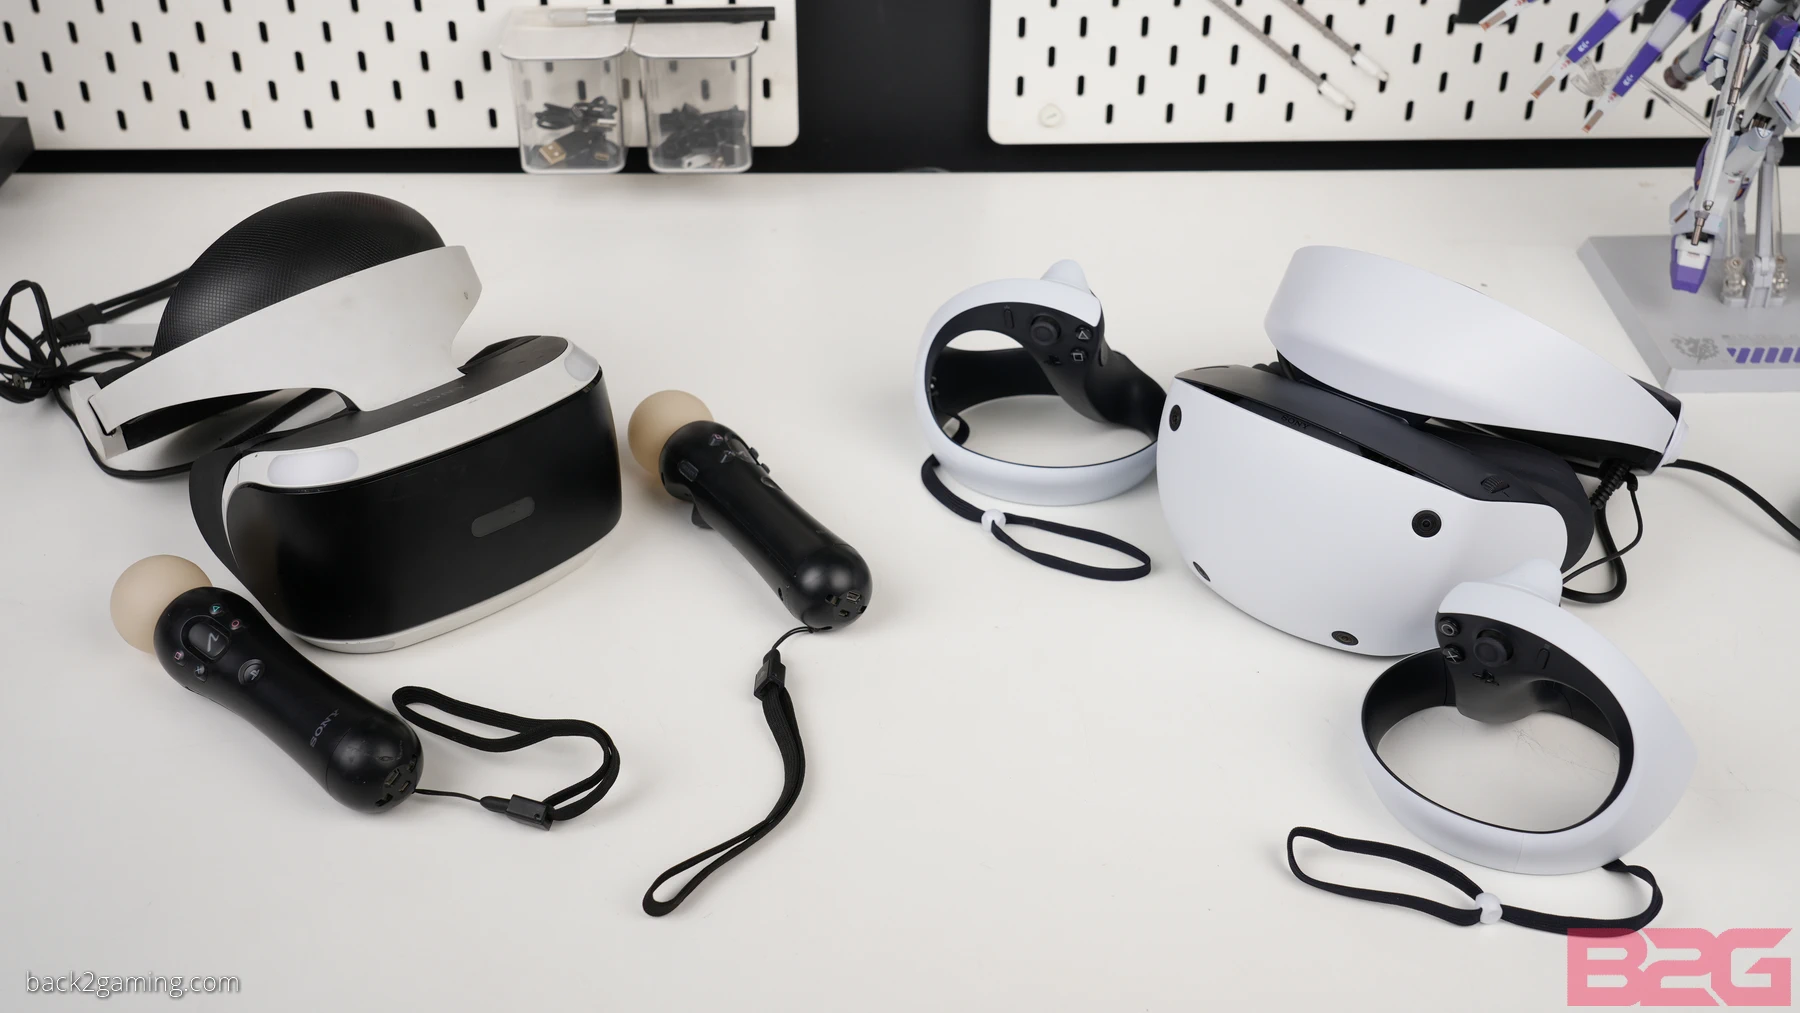 Sony PSVR2 Virtual Reality Headset Review: A Generational Leap in Fidelity and Clarity - returnal